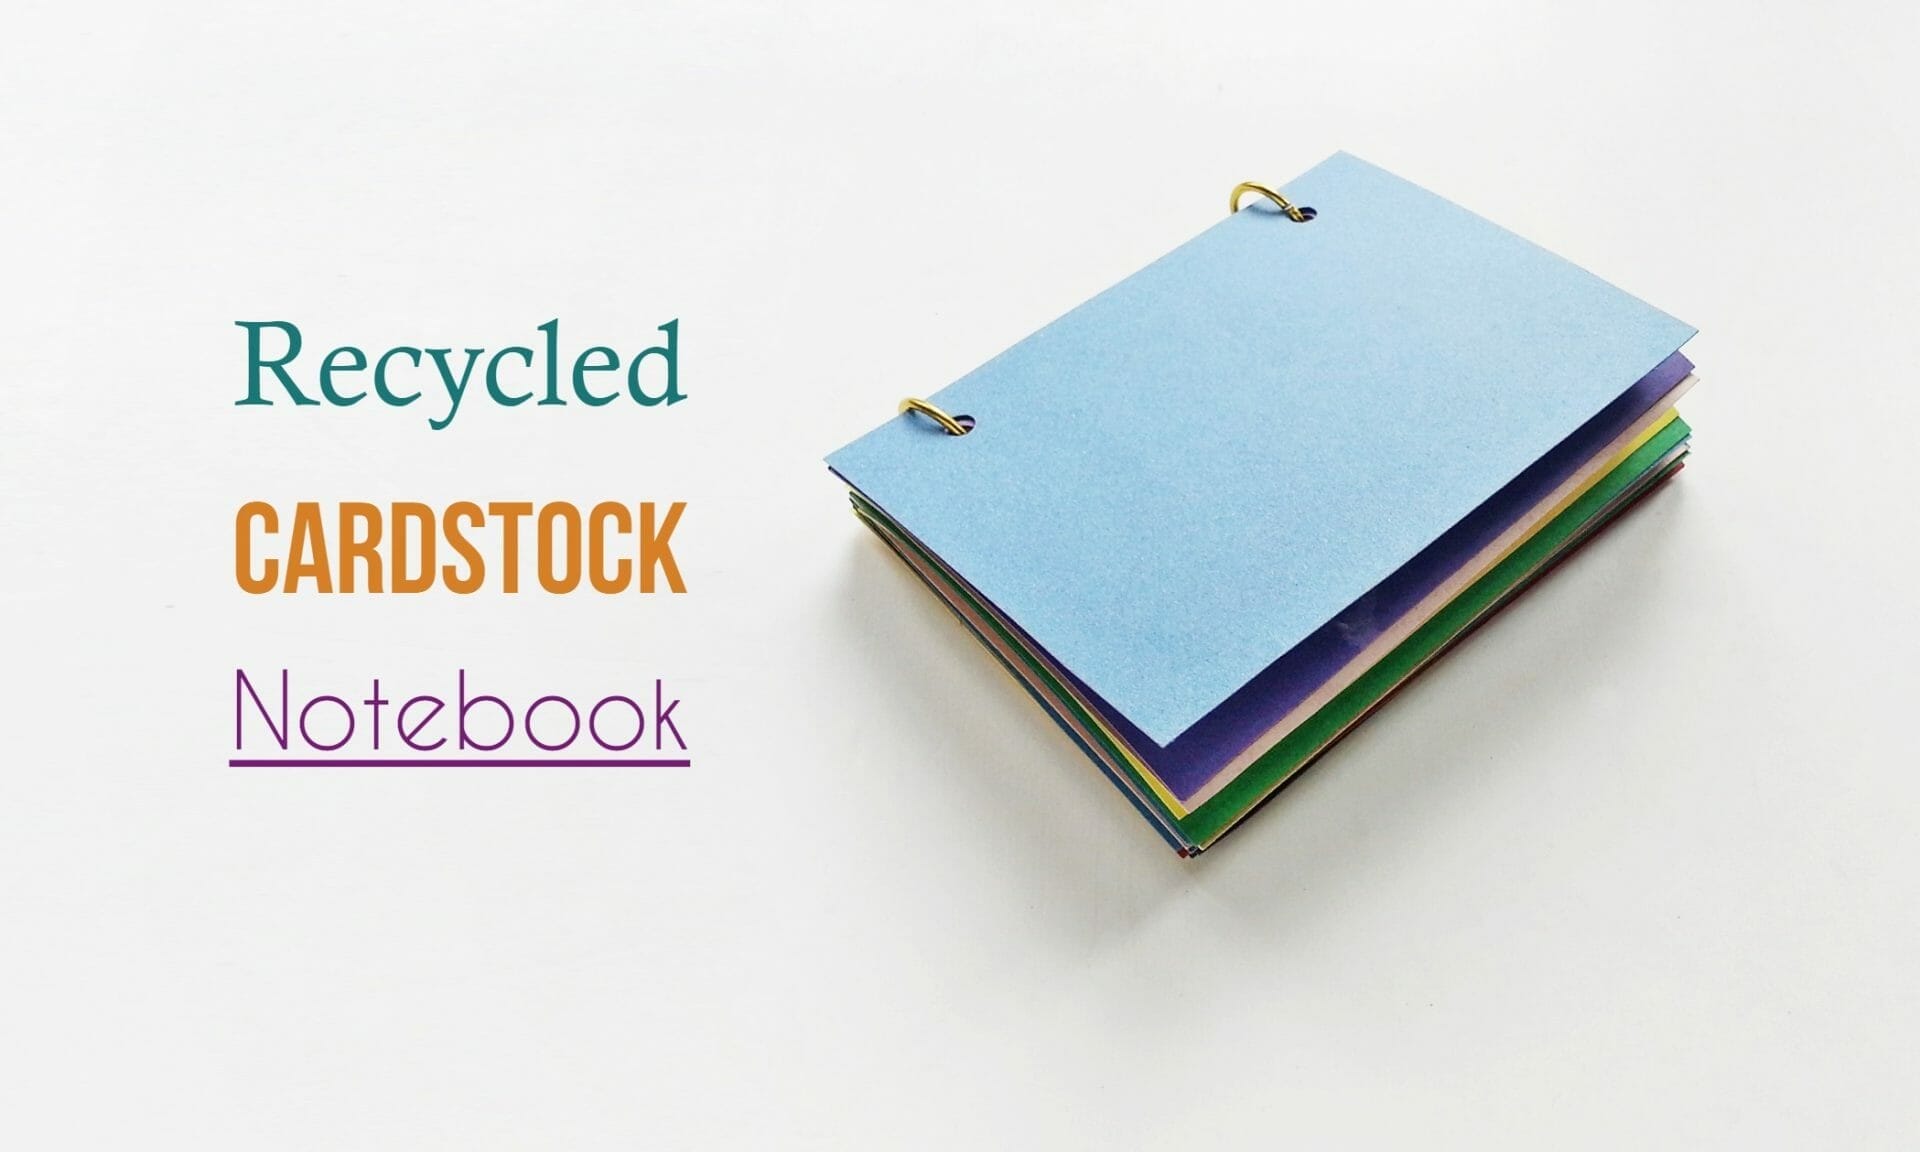 cardstock notebook featured image - DIY Recycled Cardstock Notebook